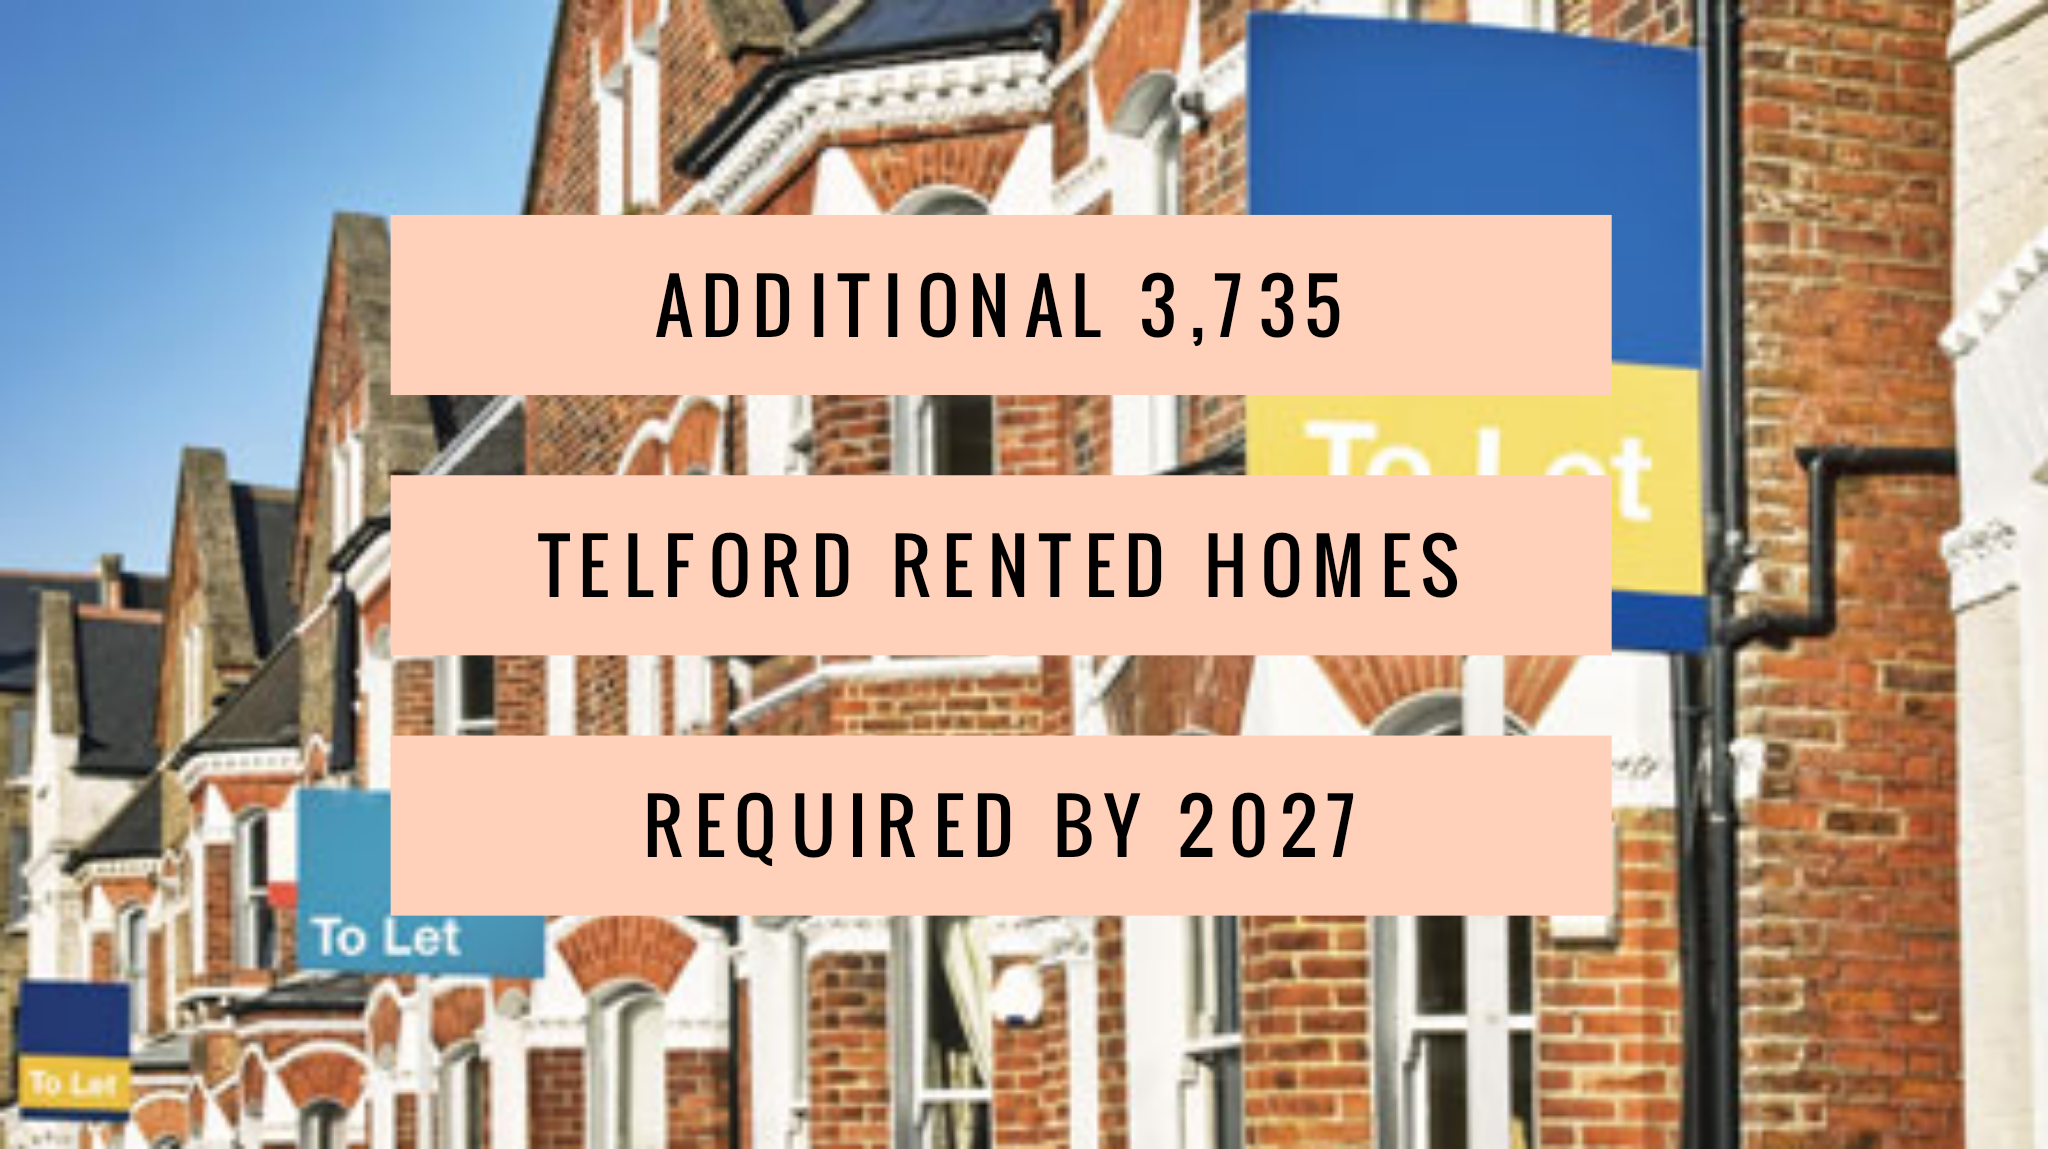 Additional 3,735 Telford Rented Homes Required by 2027